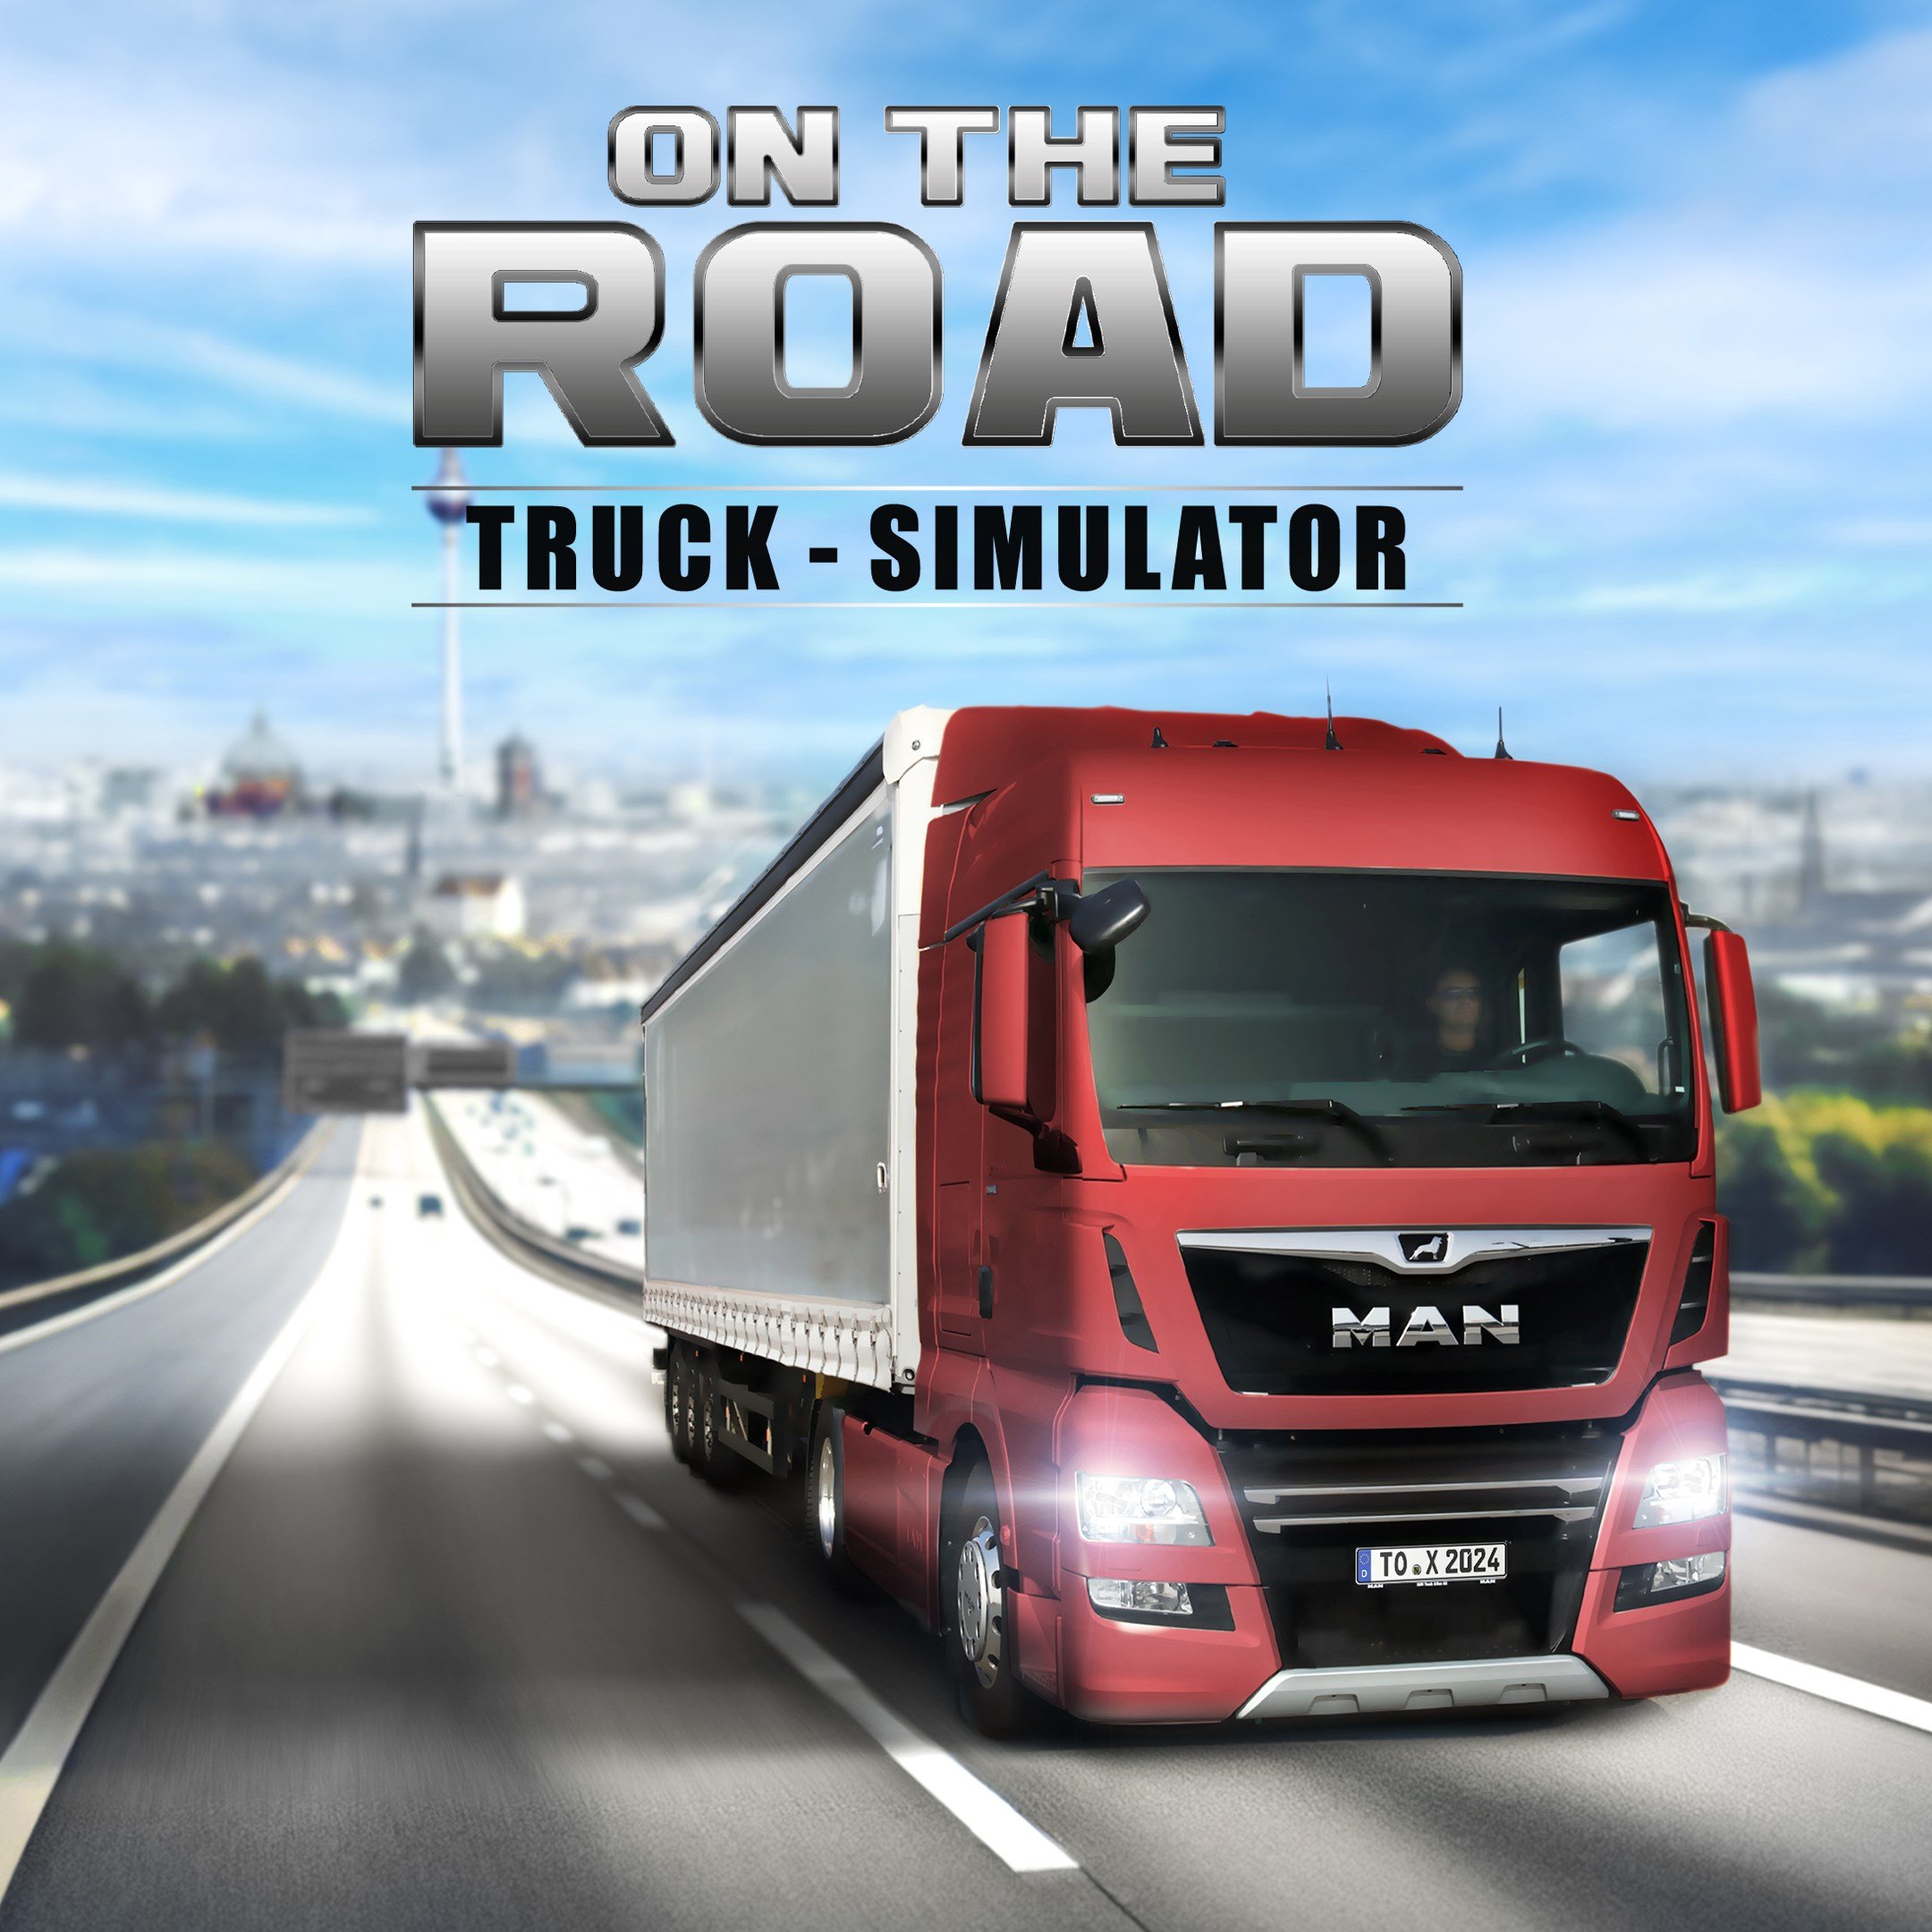 On The Road - The Truck Simulator